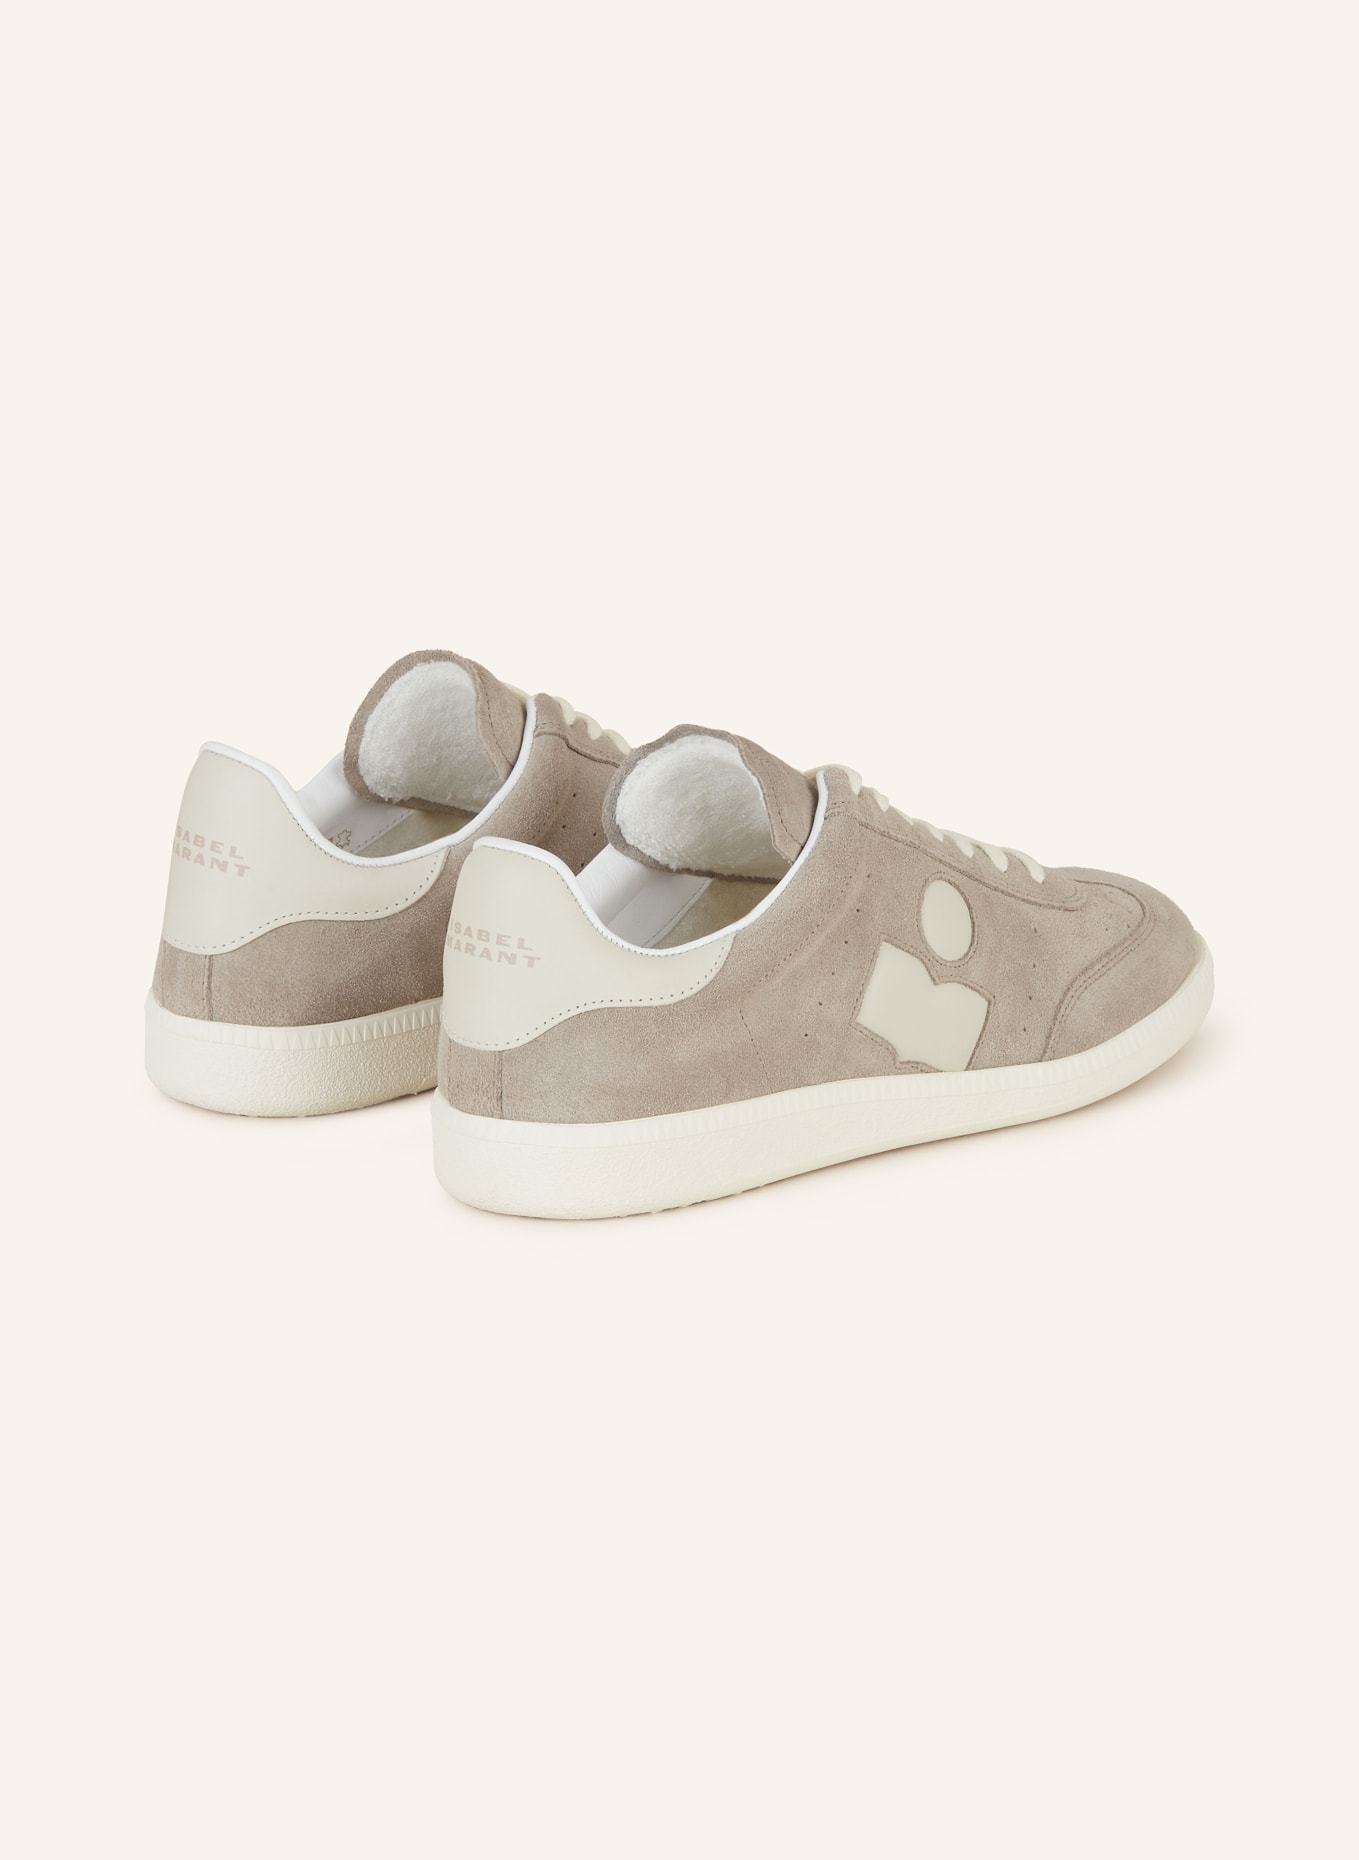 ISABEL MARANT Sneaker BRYCE, Farbe: TAUPE (Bild 2)